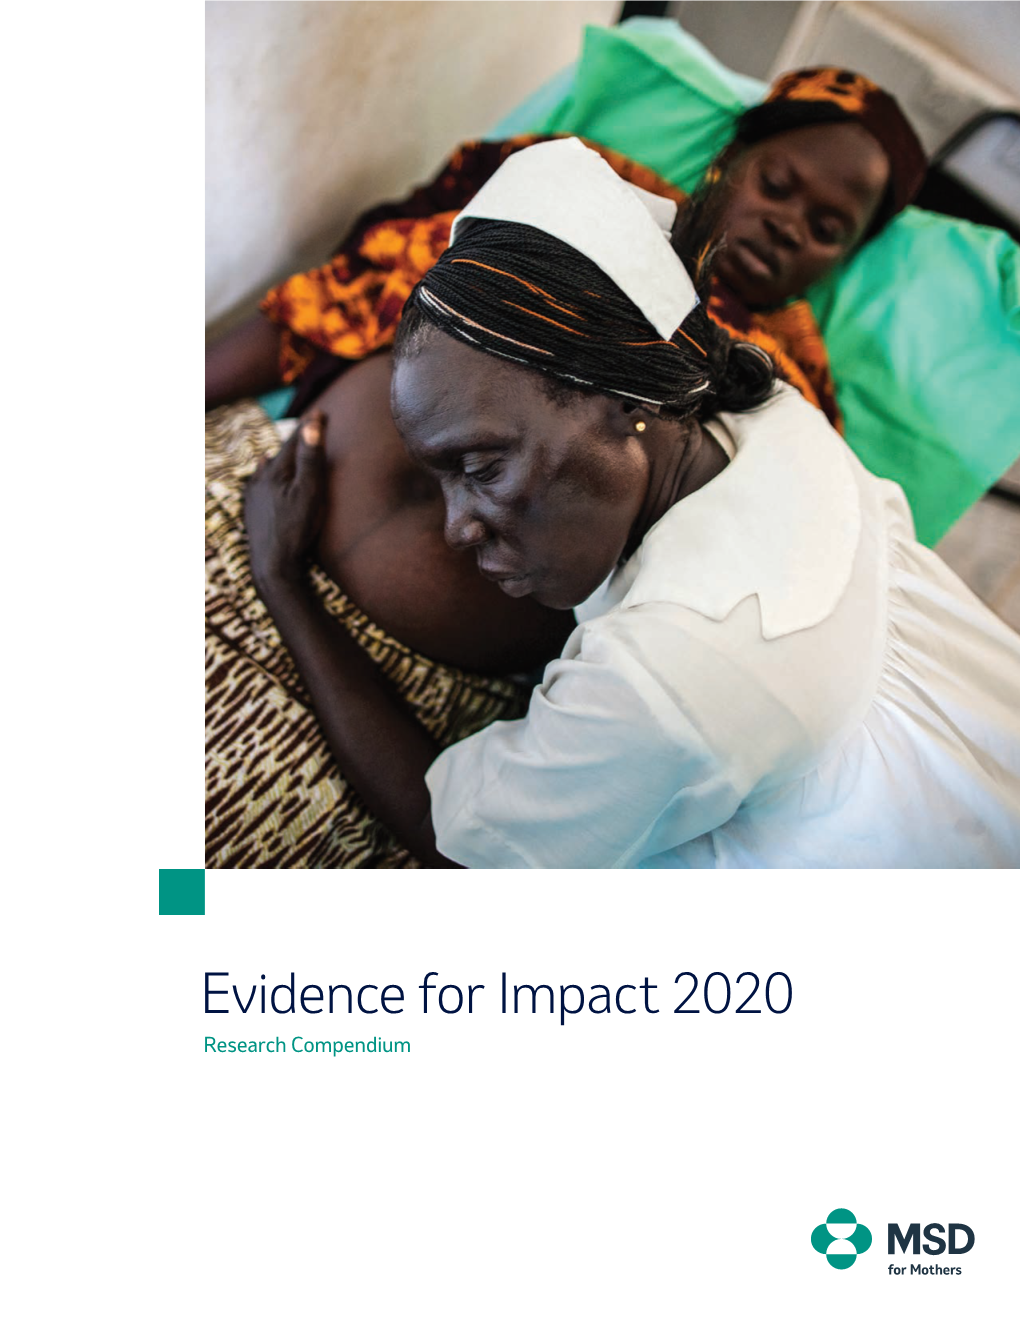 Evidence for Impact 2020: Research Compendium